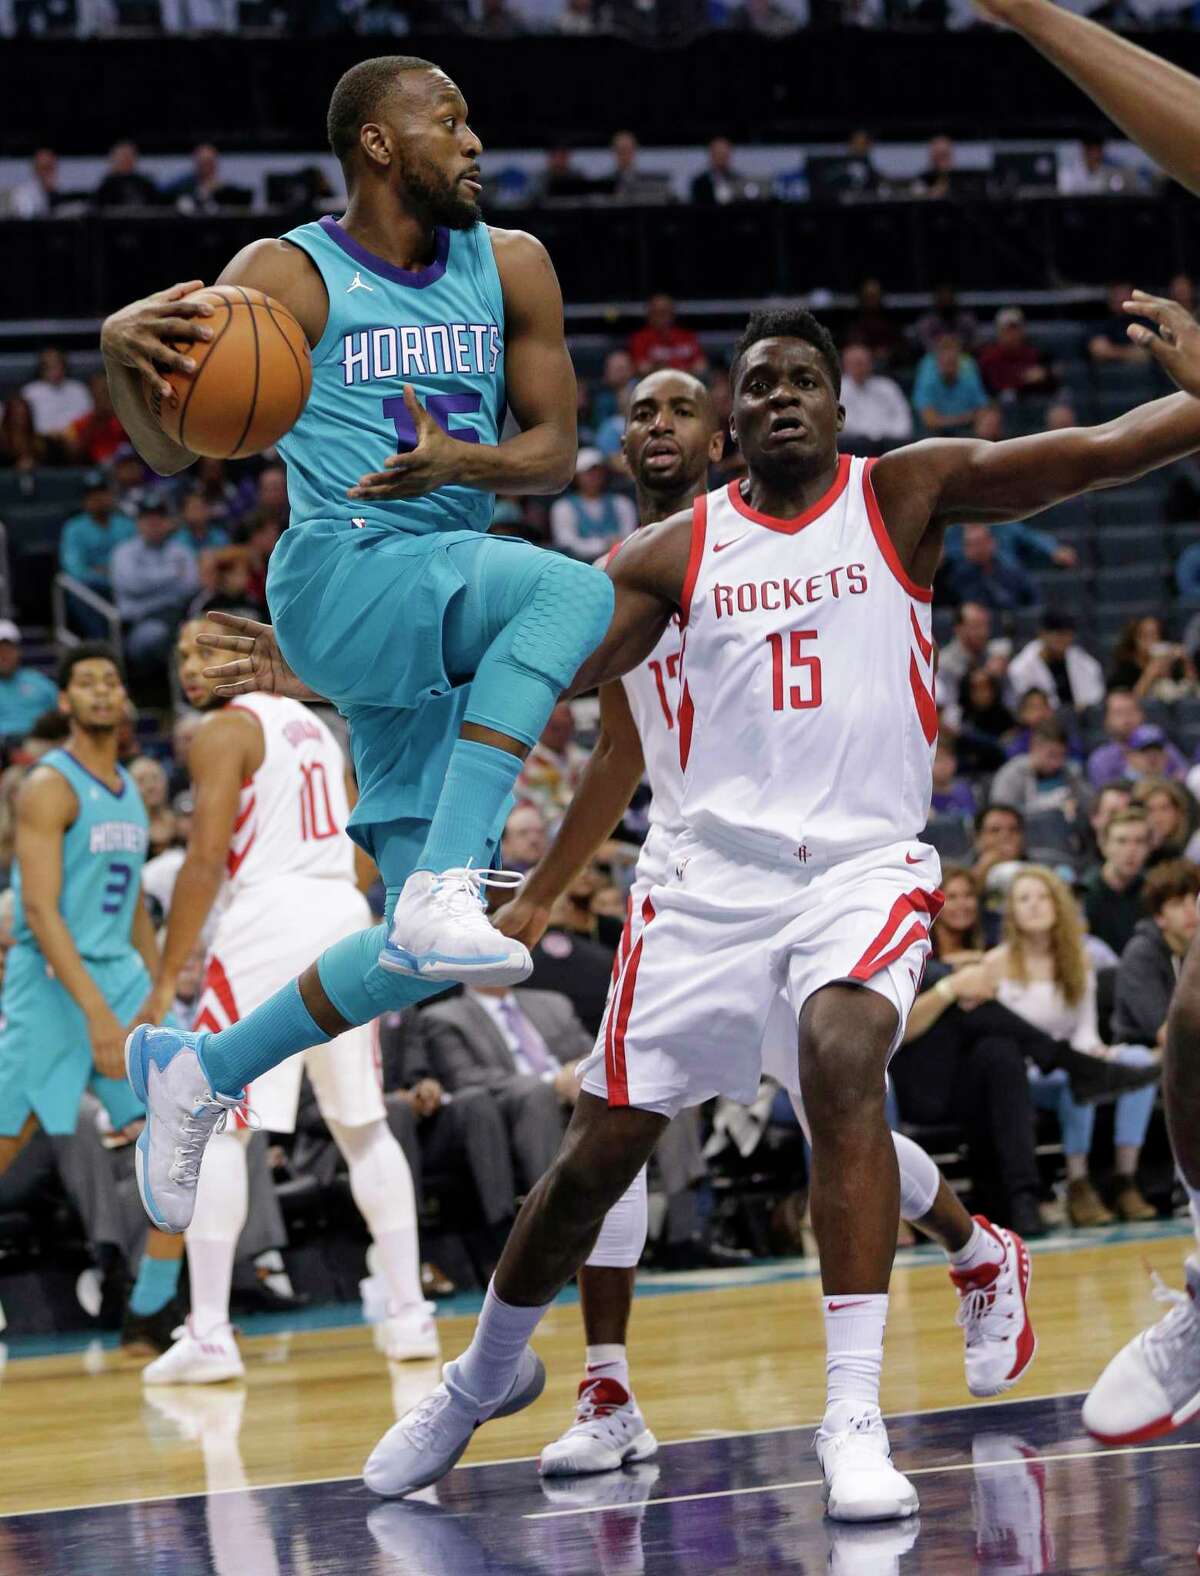 Charlotte Hornets' Kemba Walker, left, looks to pass the ball around Houston Rockets' Clint Capela, right, during the first half of an NBA basketball game in Charlotte, N.C., Friday, Oct. 27, 2017. (AP Photo/Chuck Burton)